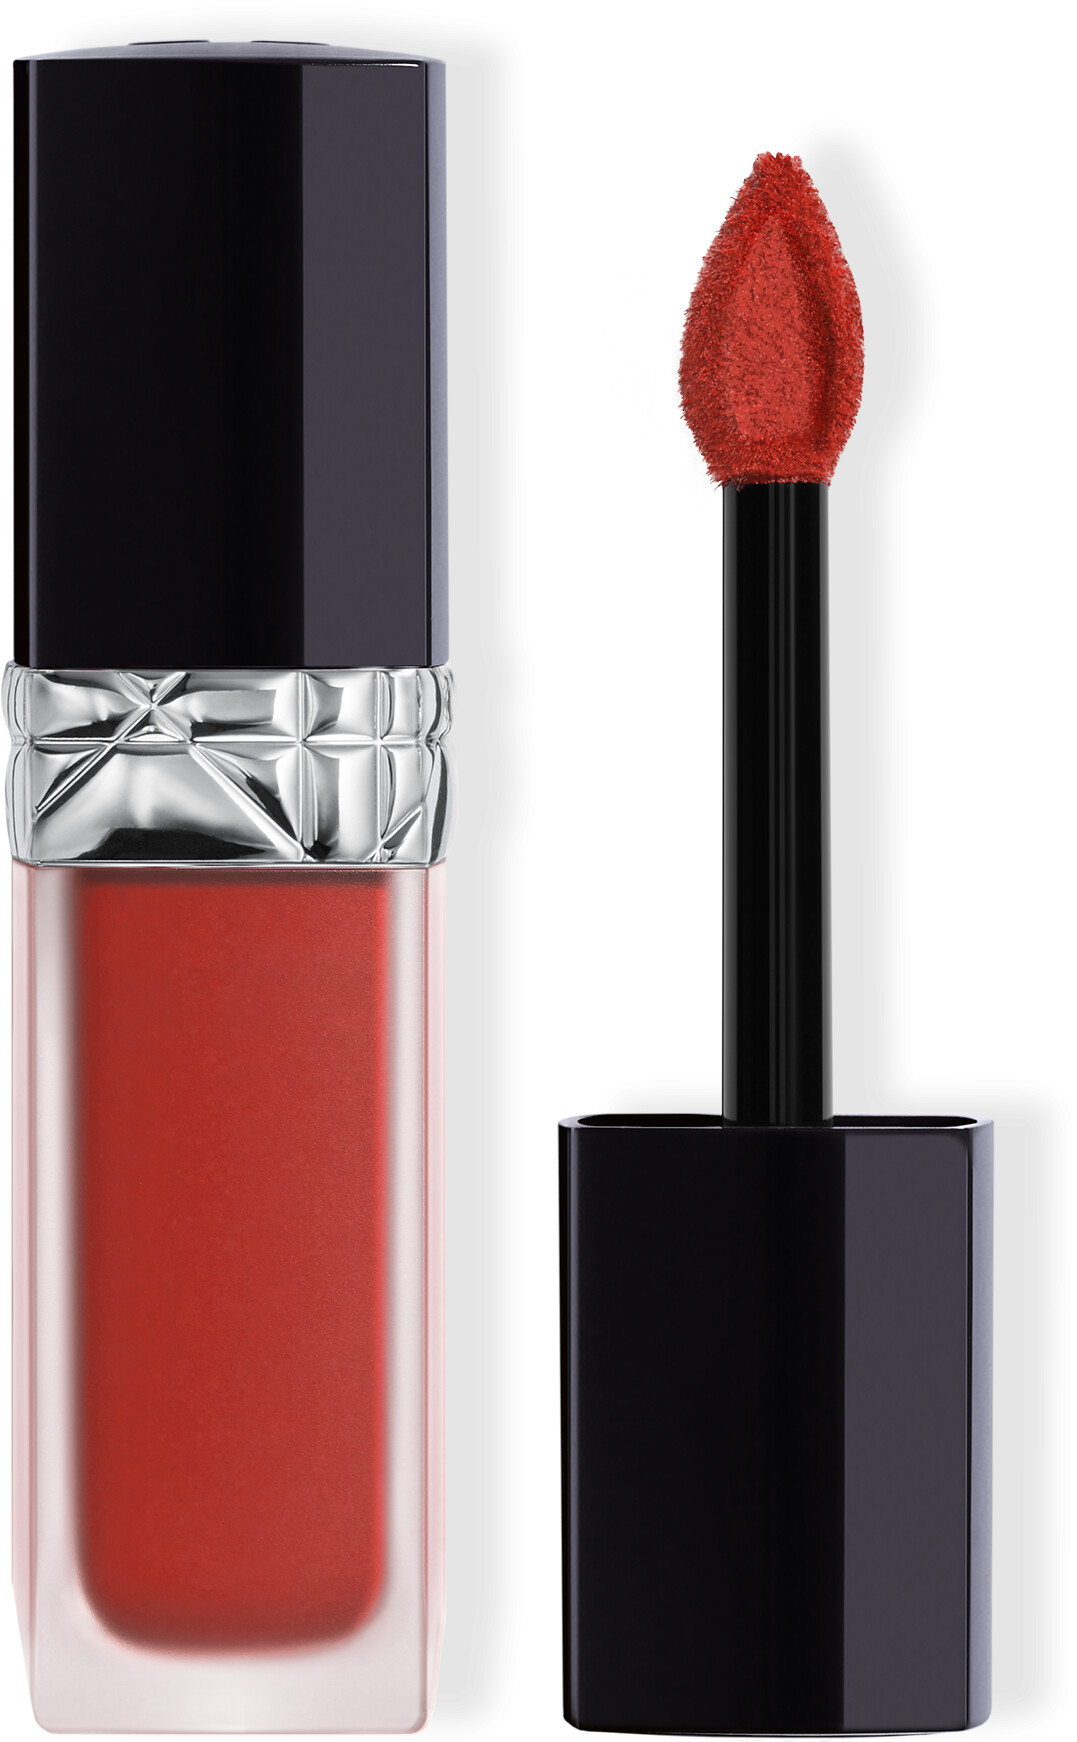 DIOR Rouge Dior Forever Liquid Lipstick 6ml 861 - Forever Charm